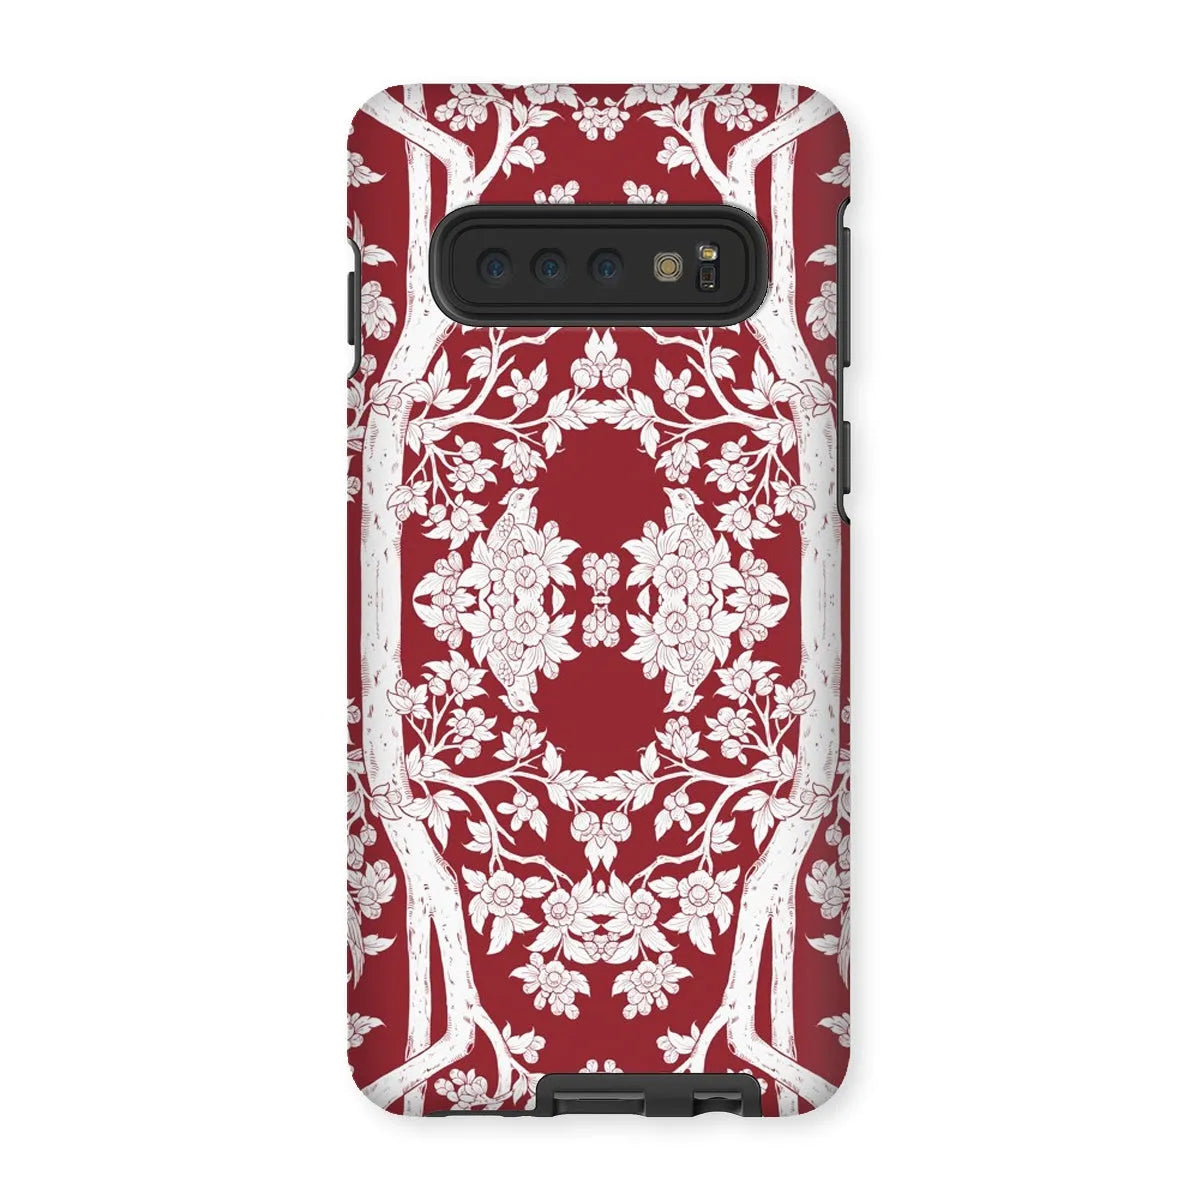 Aviary Red Aesthetic Pattern Art Phone Case - Samsung Galaxy S10 / Matte - Mobile Phone Cases - Aesthetic Art